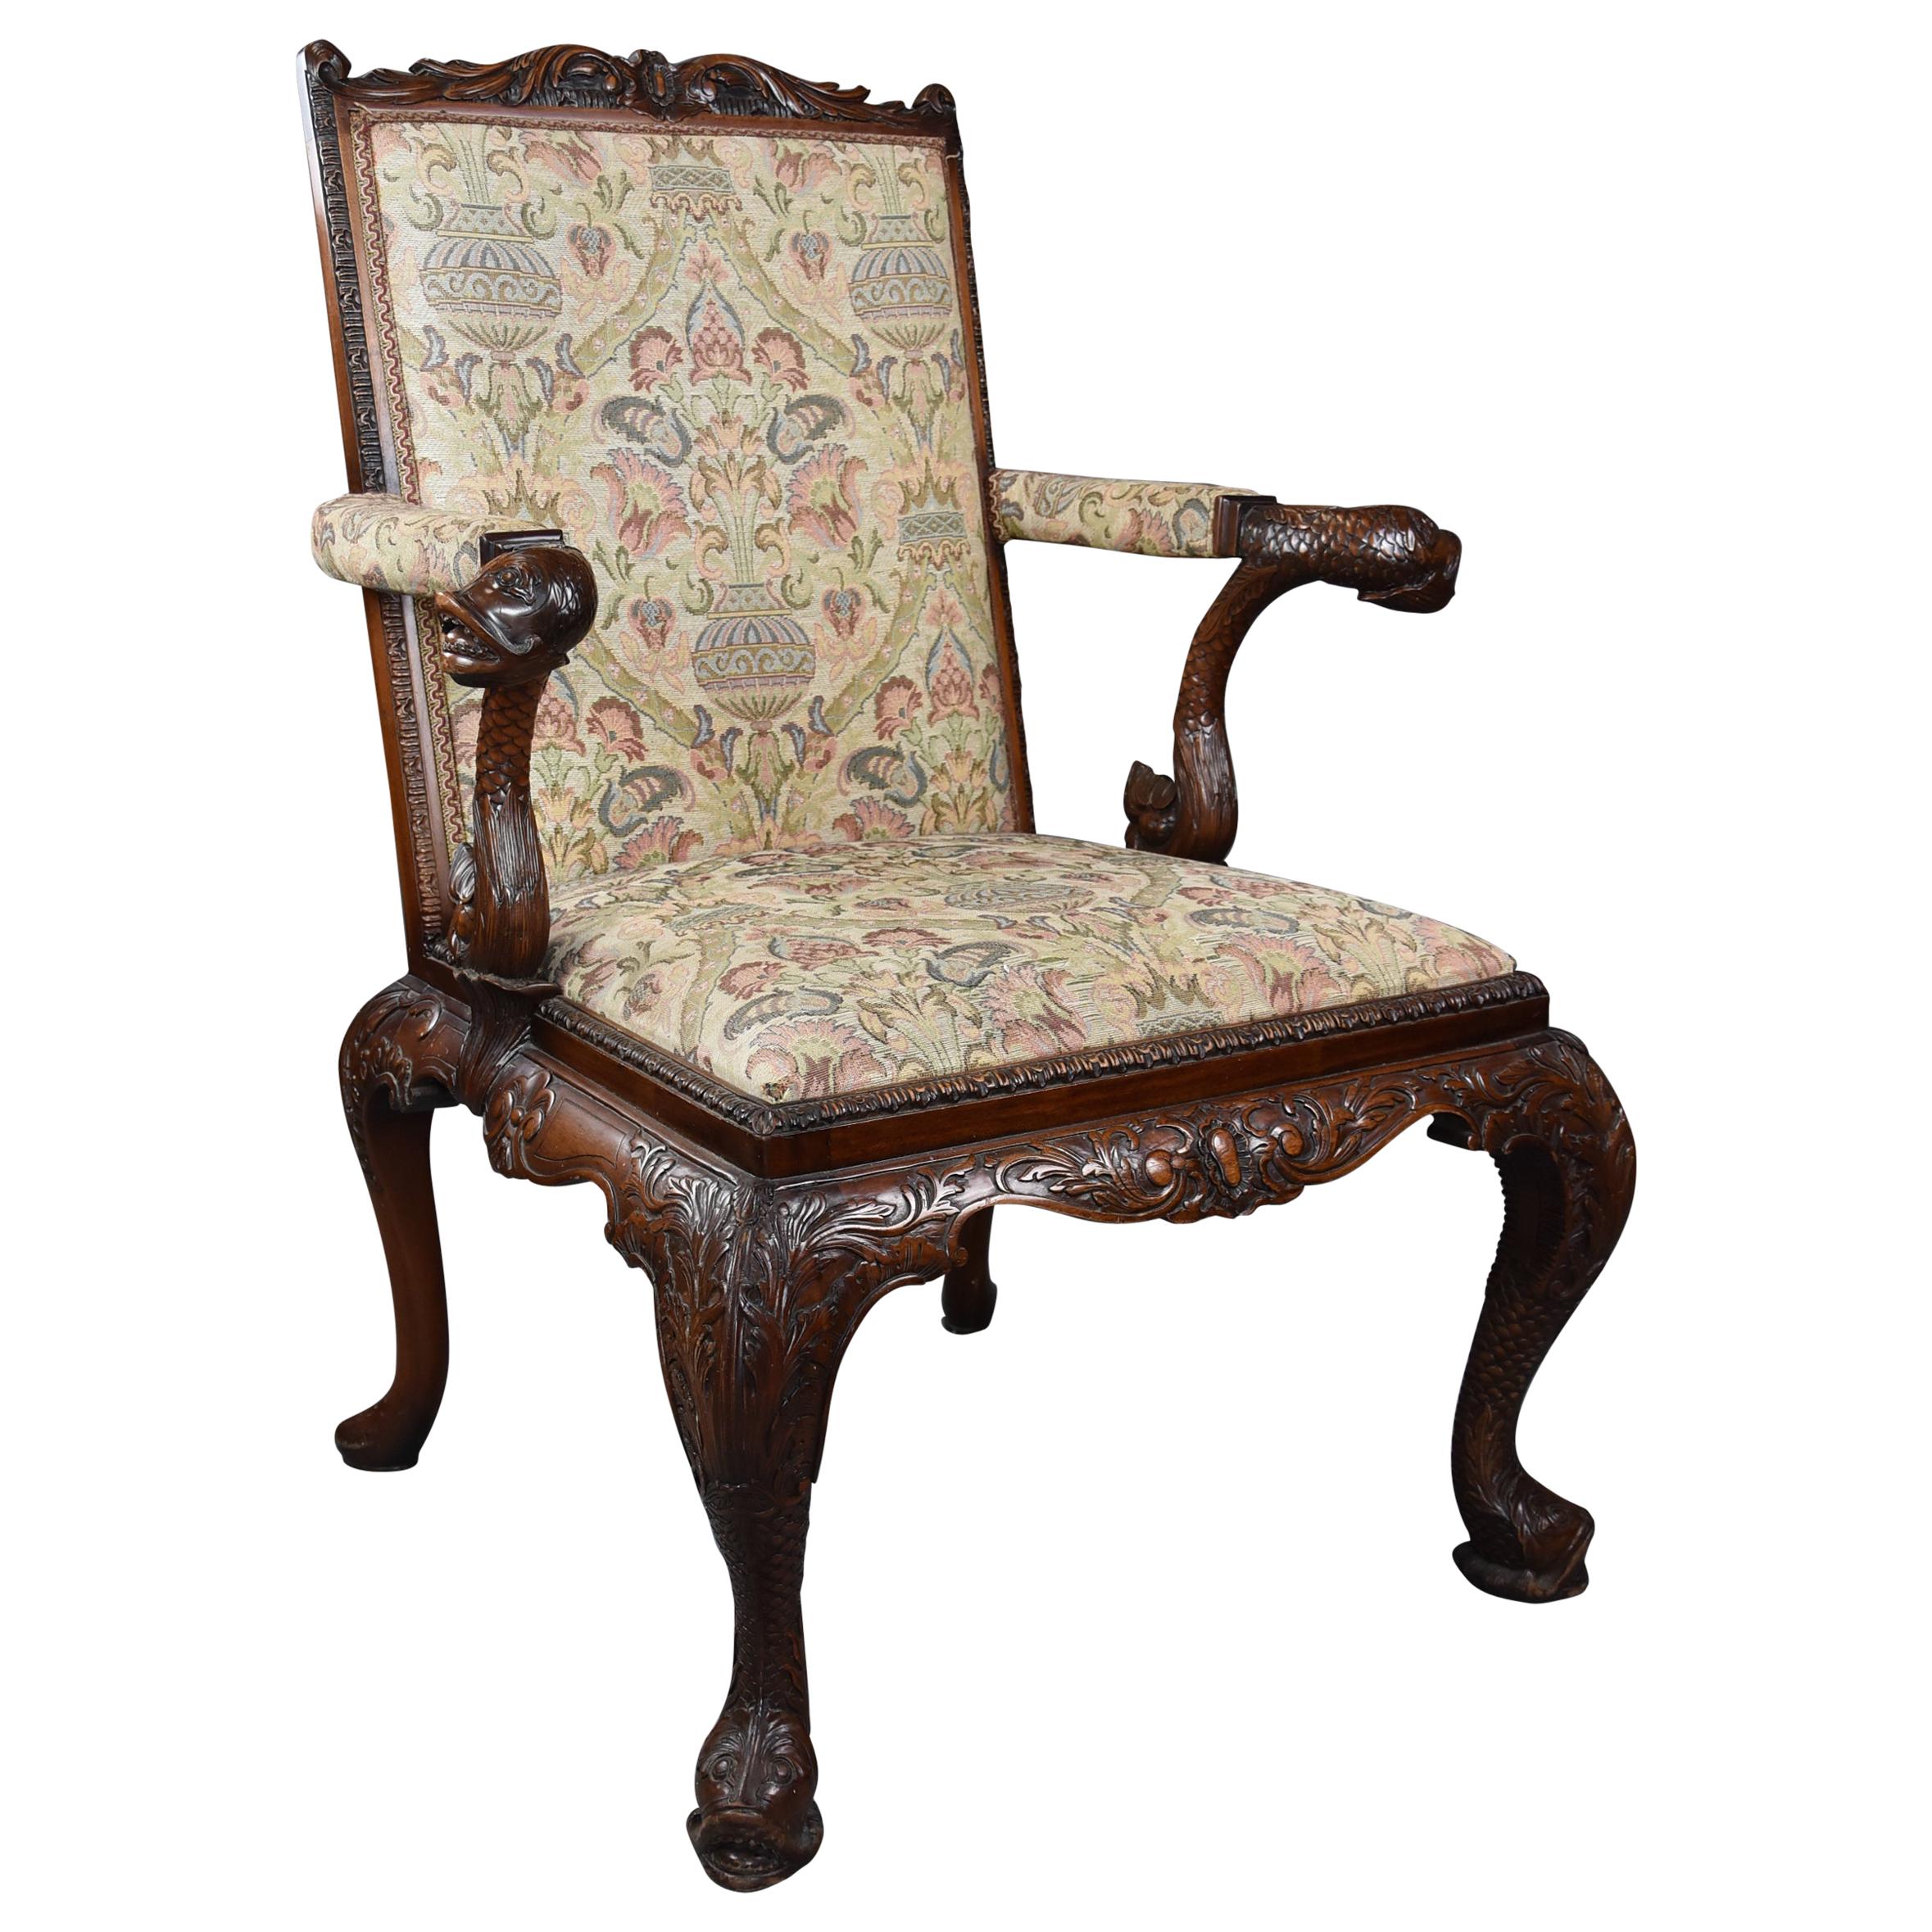 Superb George II Style Mahogany Gainsborough Open Armchair or Library Chair For Sale